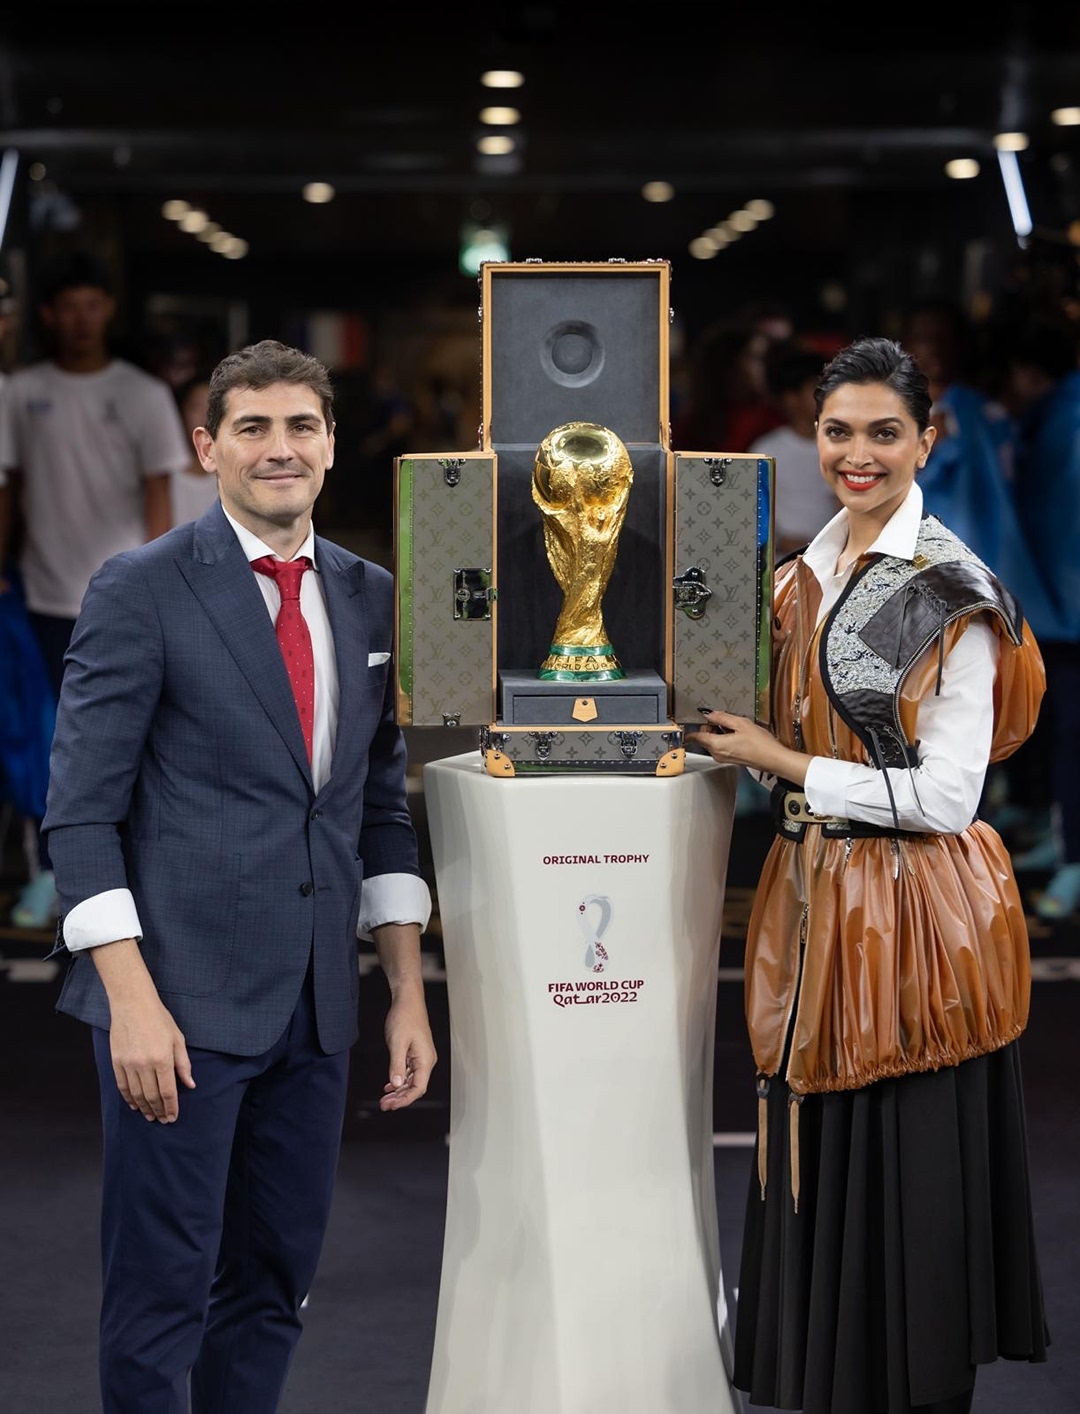 Louis Vuitton on X: Victory Travels in Louis Vuitton. #DeepikaPadukone and  #IkerCasillas presented the ultimate prize in football in a bespoke #LouisVuitton  trophy trunk at the #FIFAWorldCup2022 Final. Learn more about the